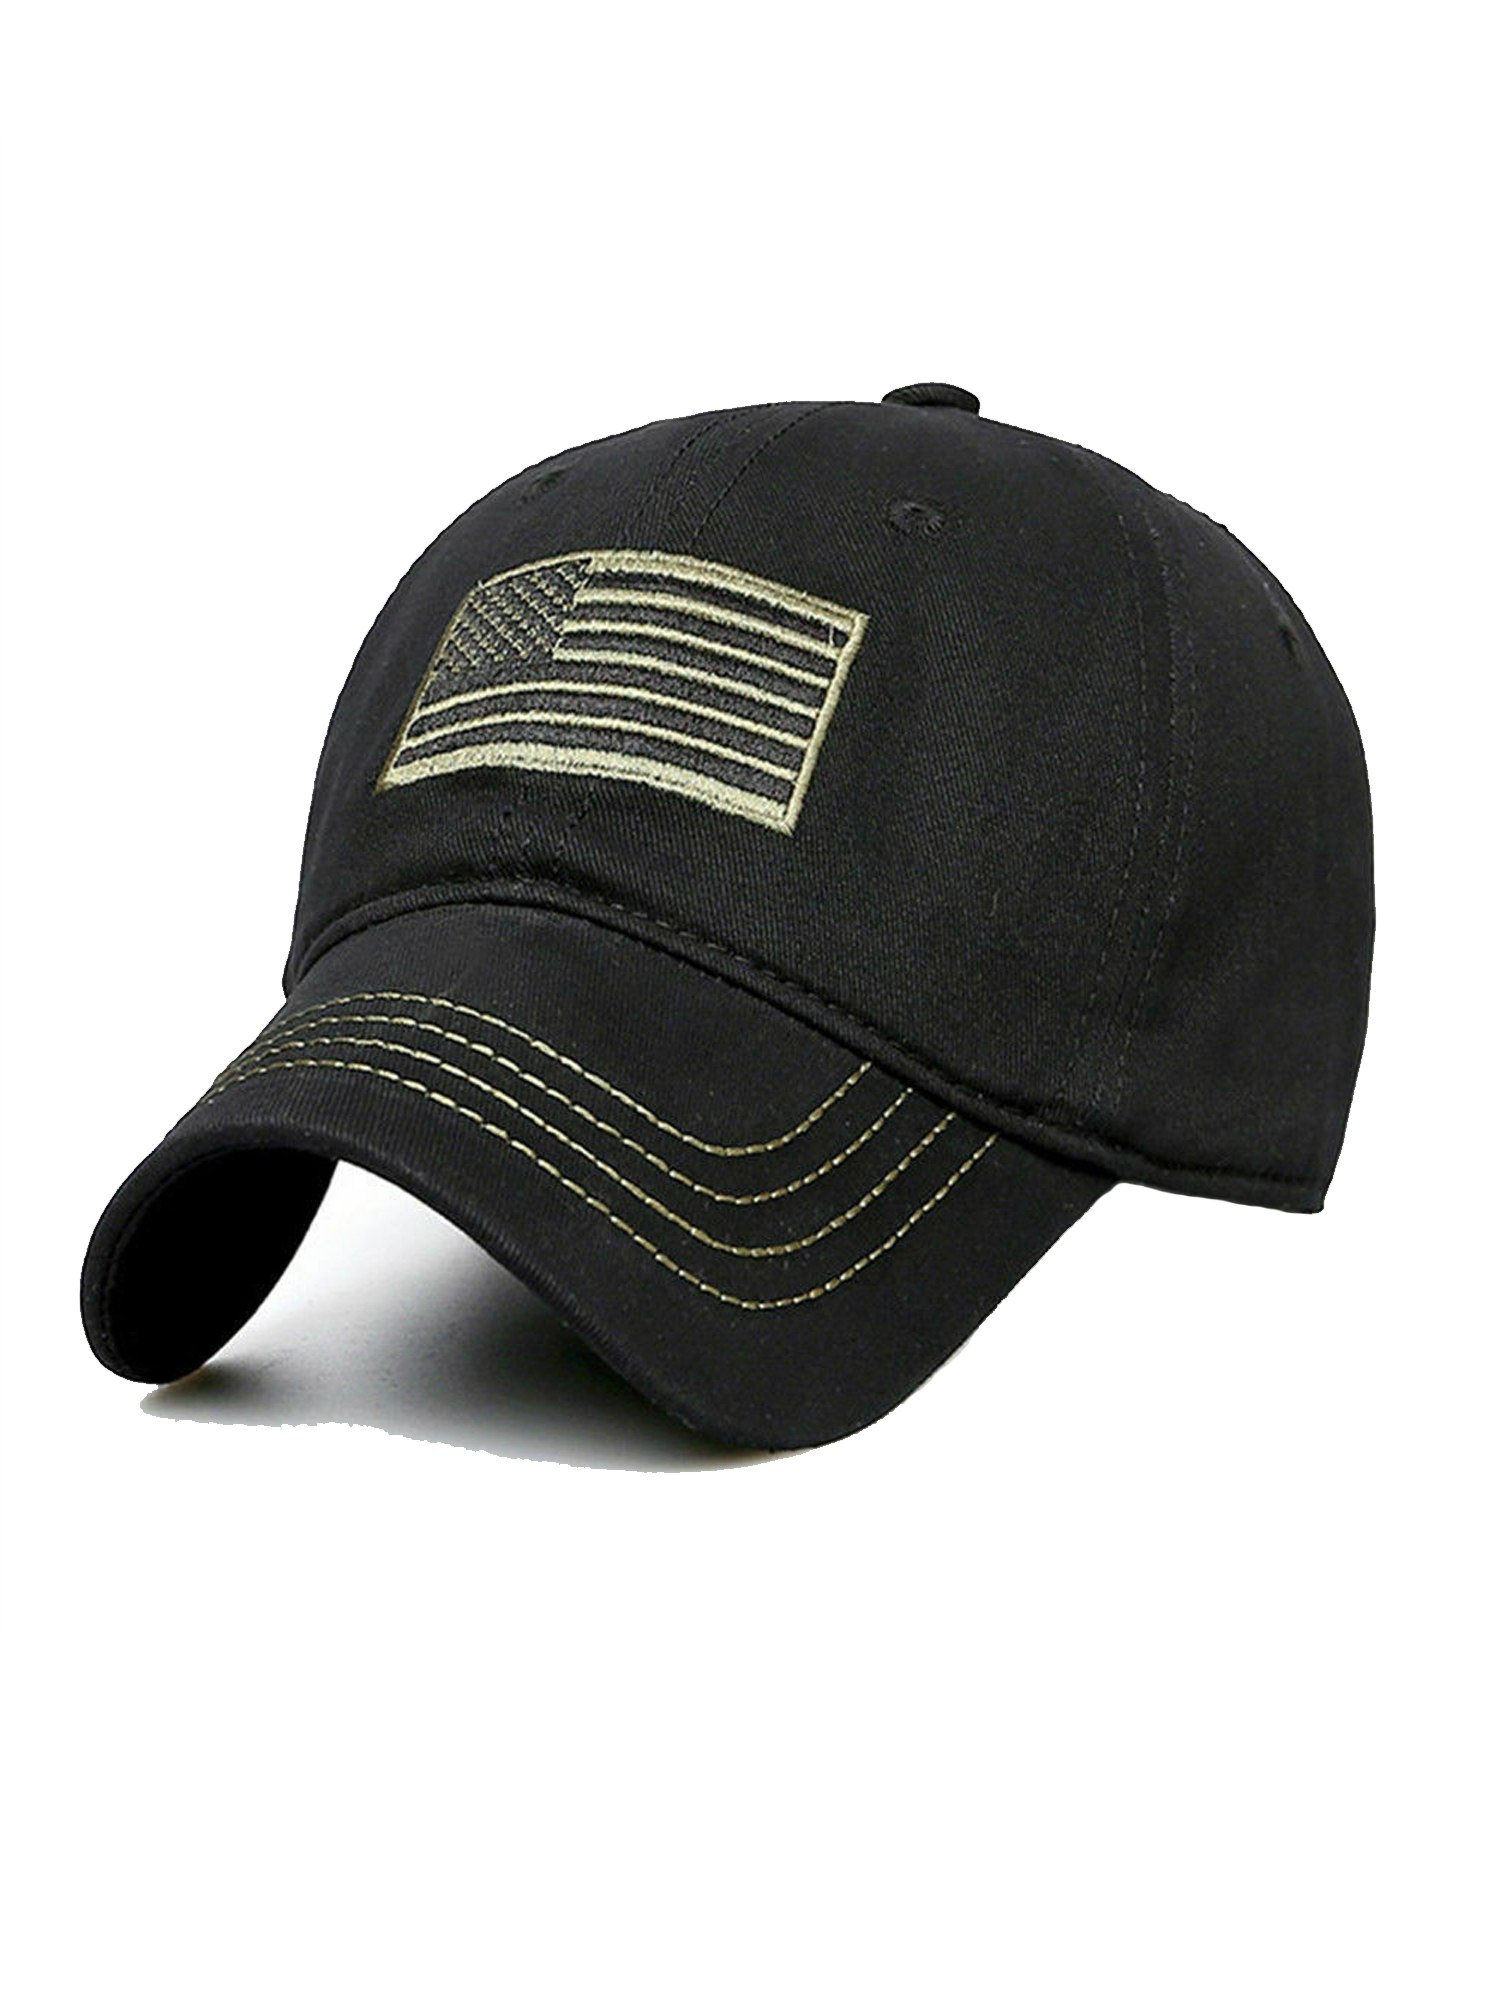 MERSARIPHY Unisex Tactical Army Cotton Military Hat Flag Mesh Baseball Cap - image 1 of 5